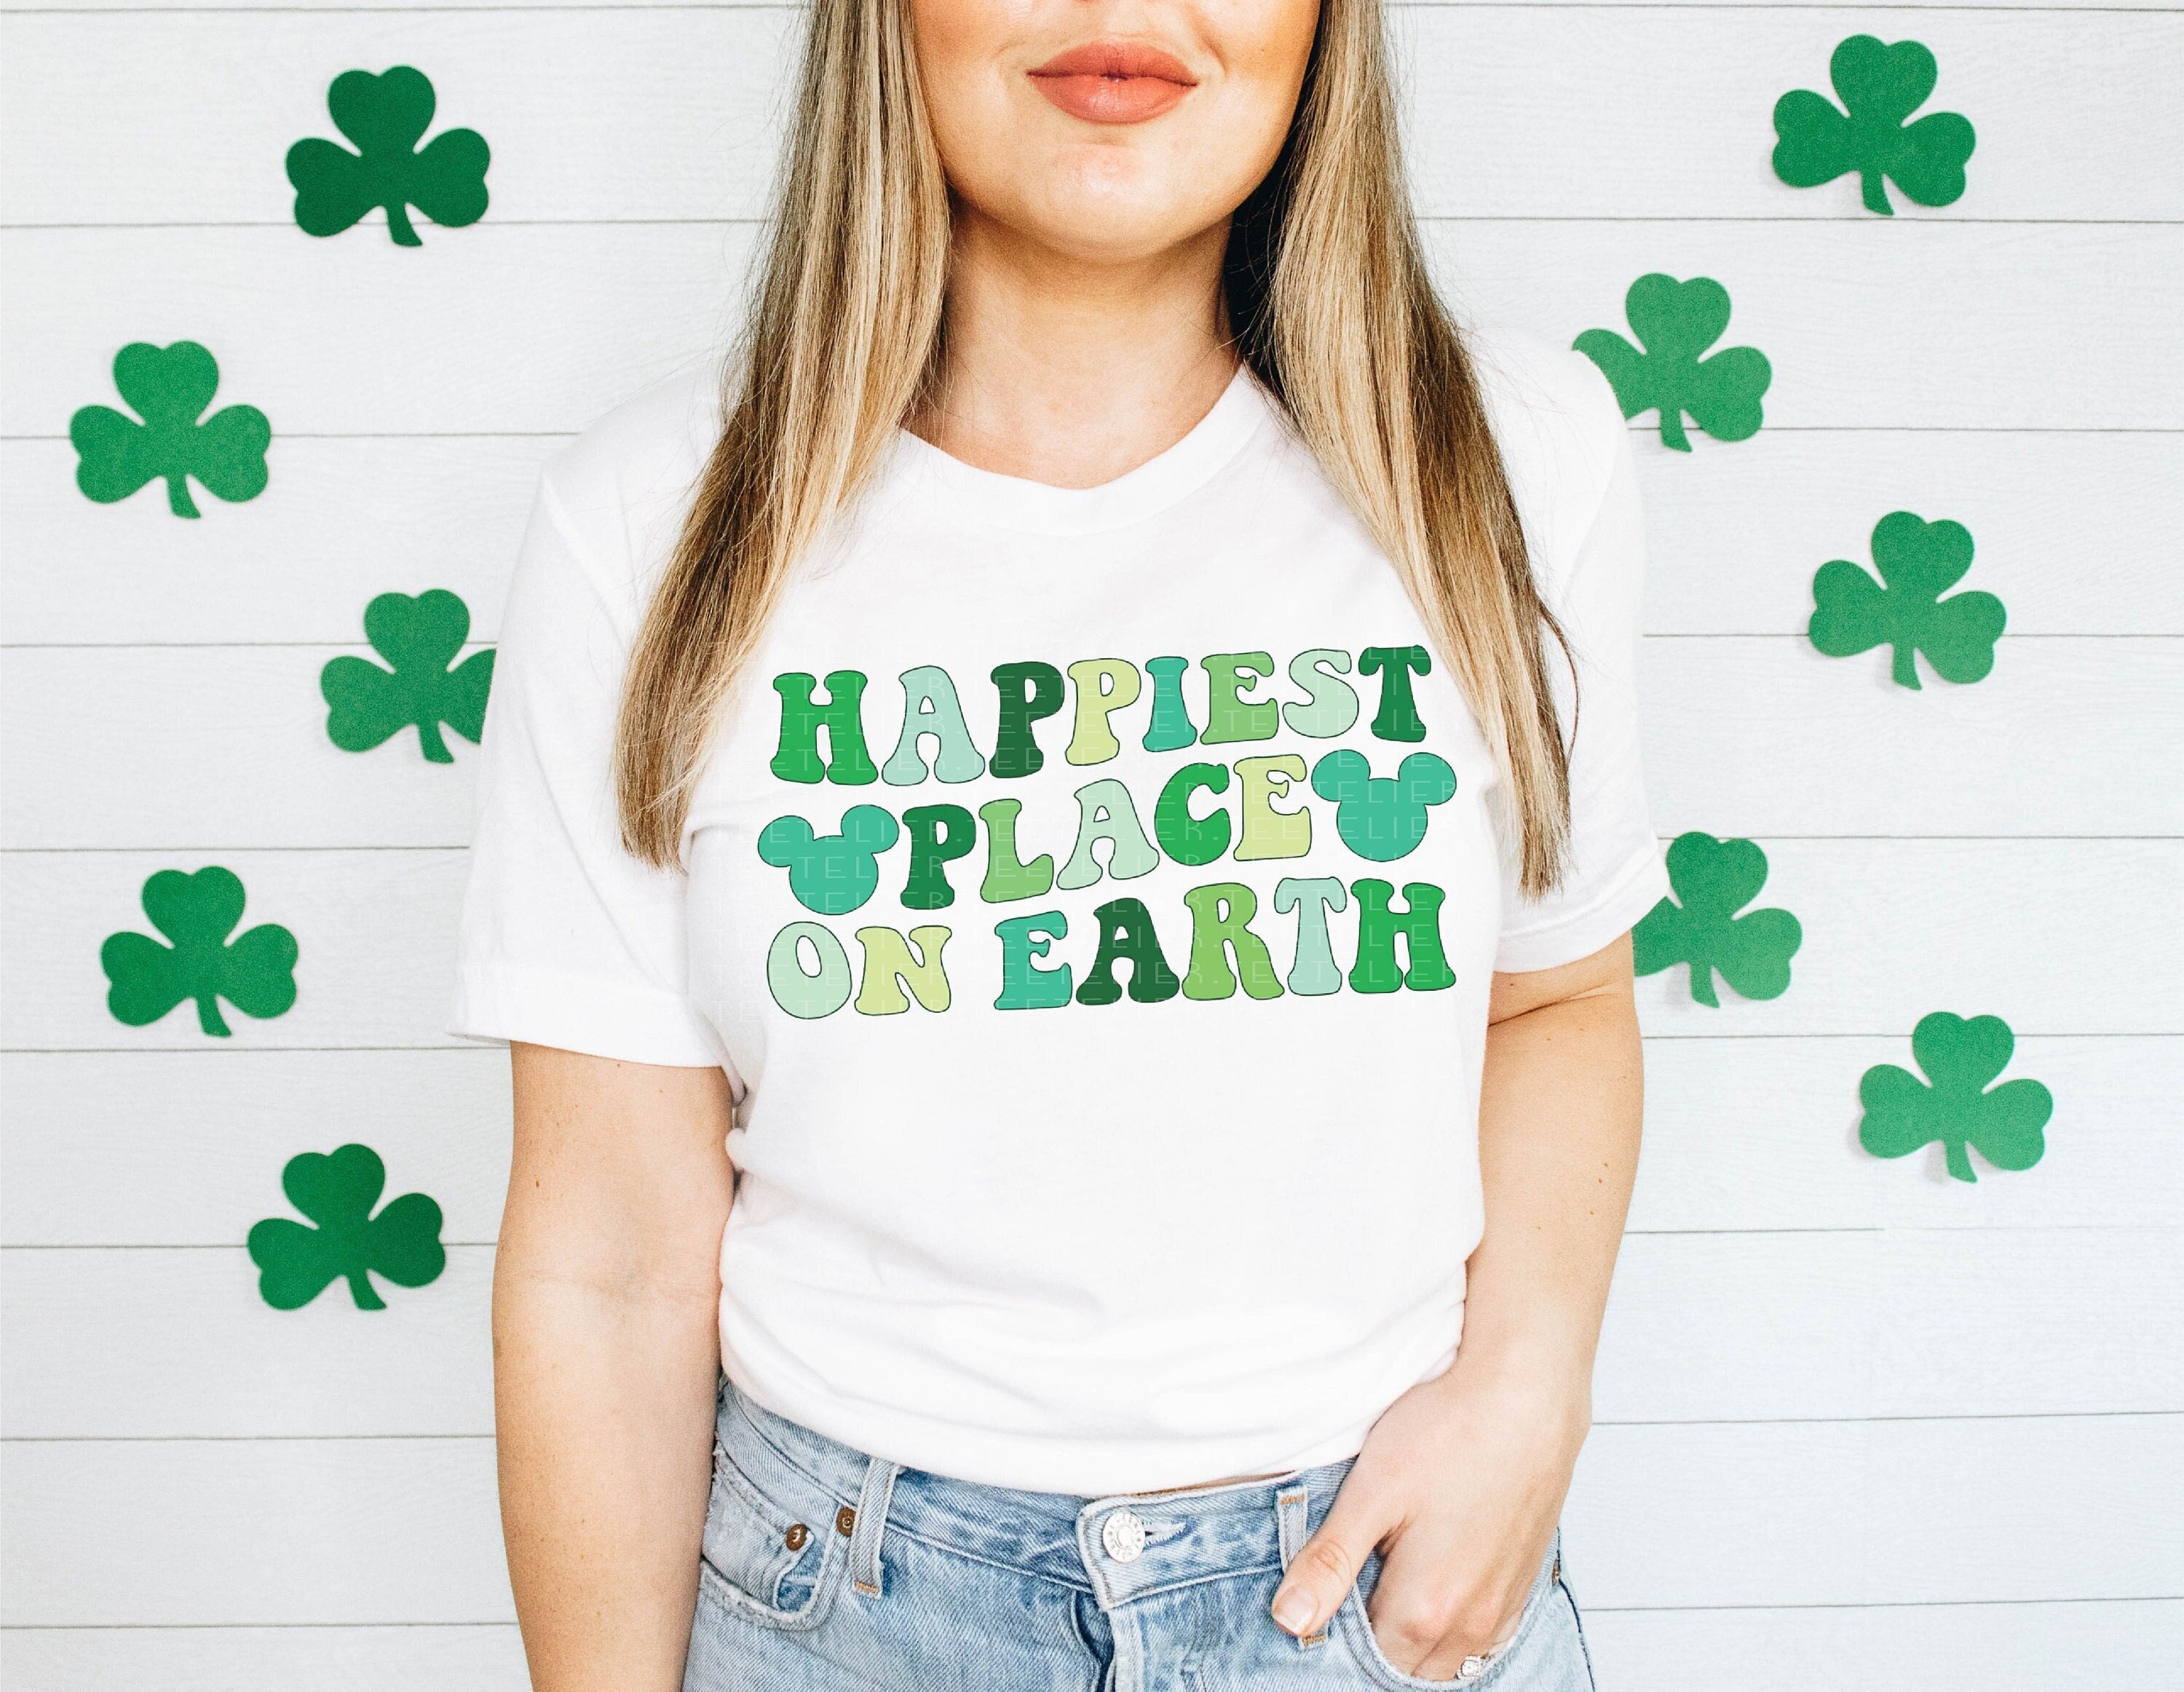 Happiest Place On Earth Shirt, St Patricks Day Shirts, St Paddys Mouse Ears Shirts